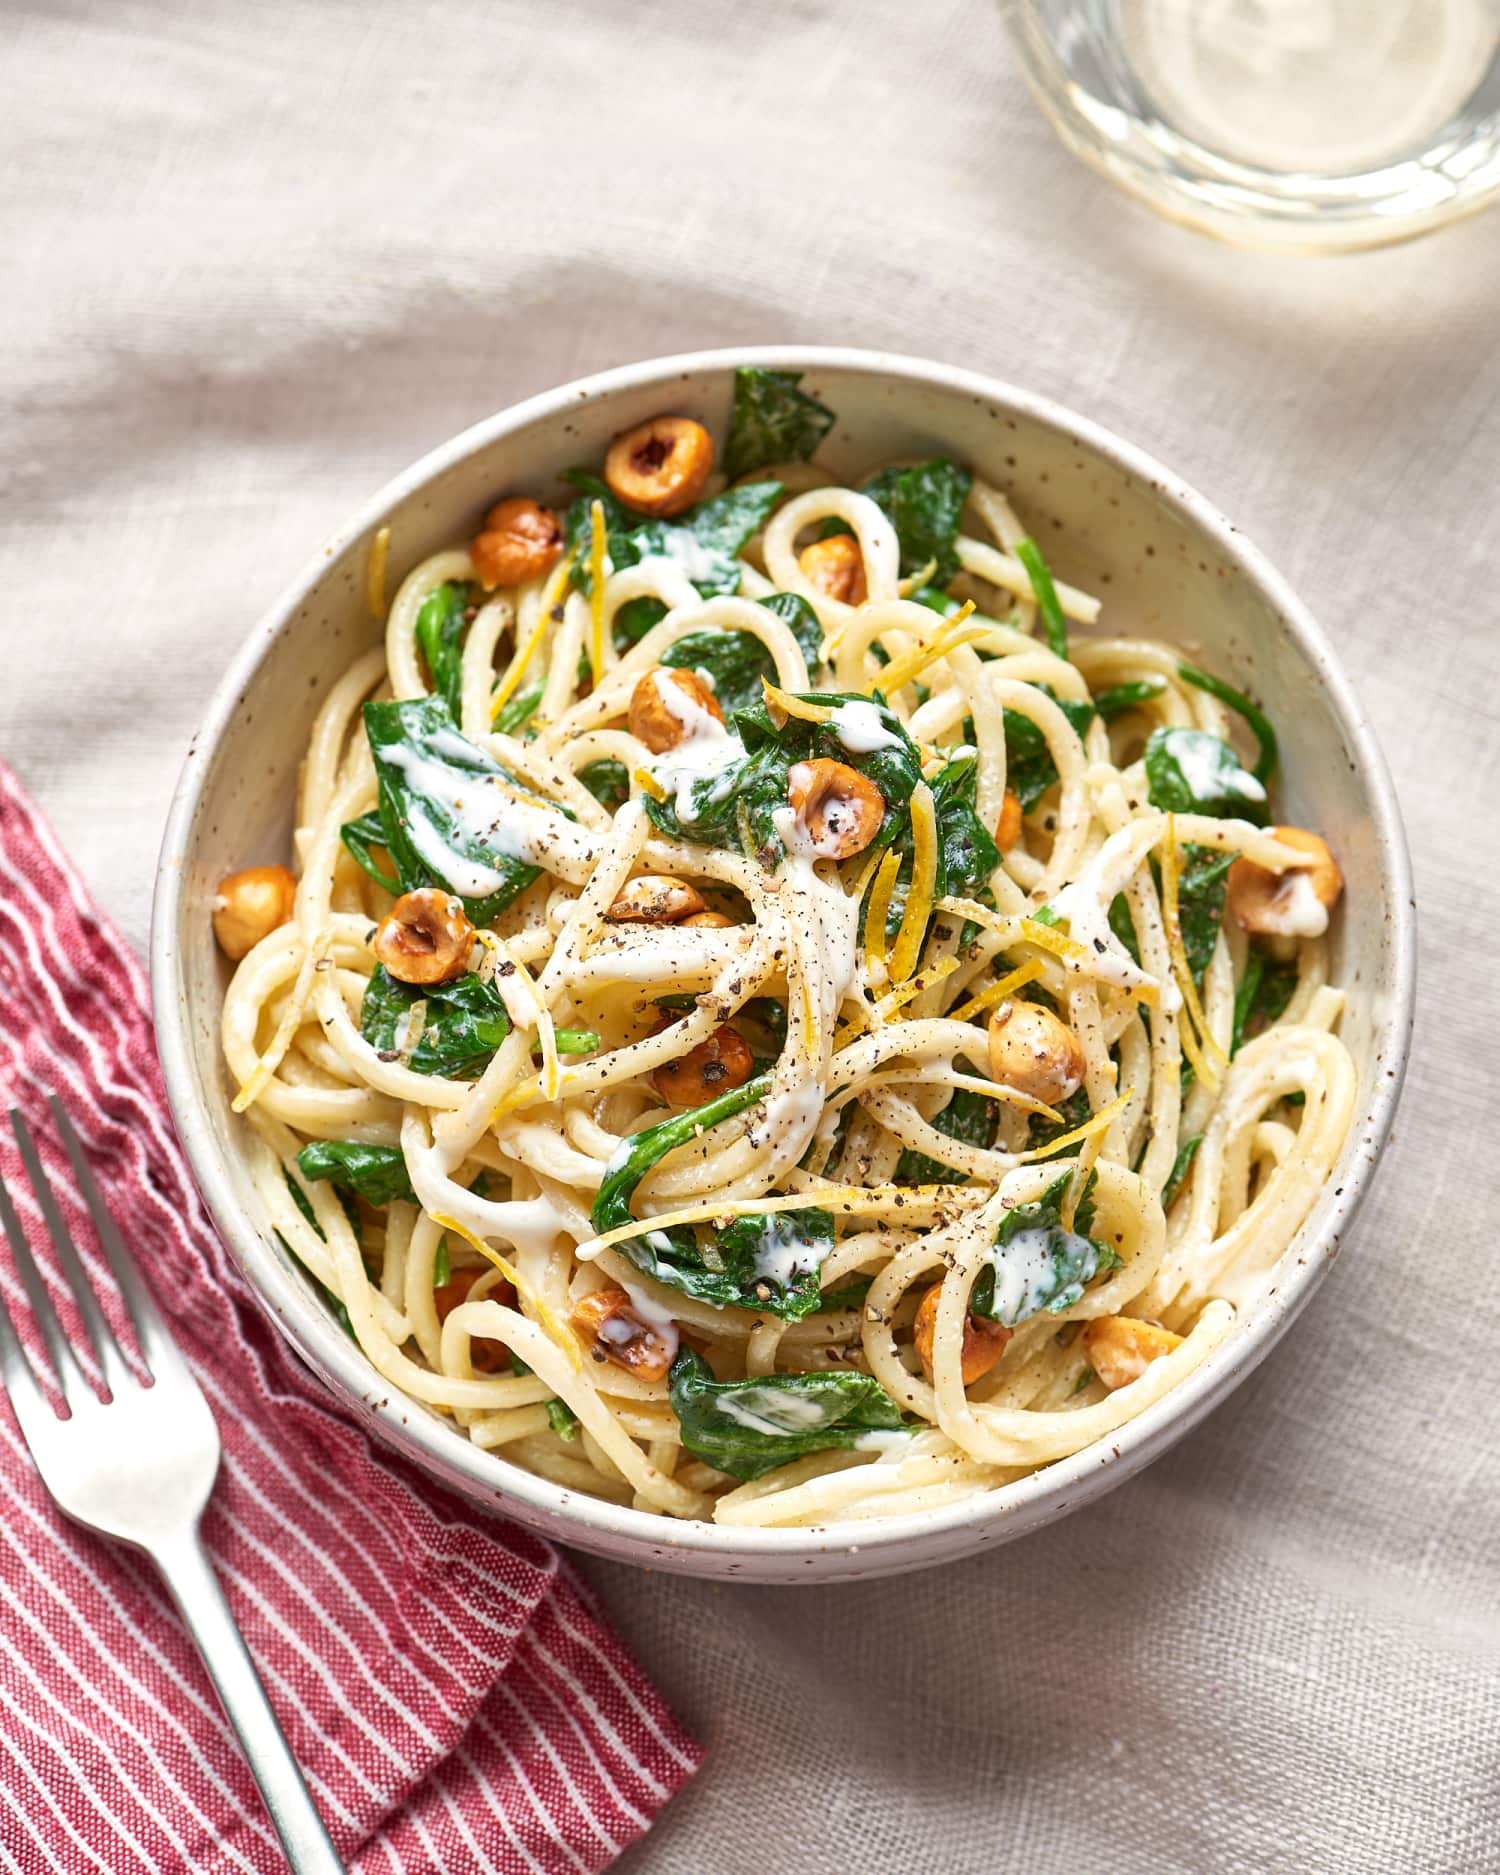 Our 10 Favorite Meatless Pasta Recipes | Kitchn